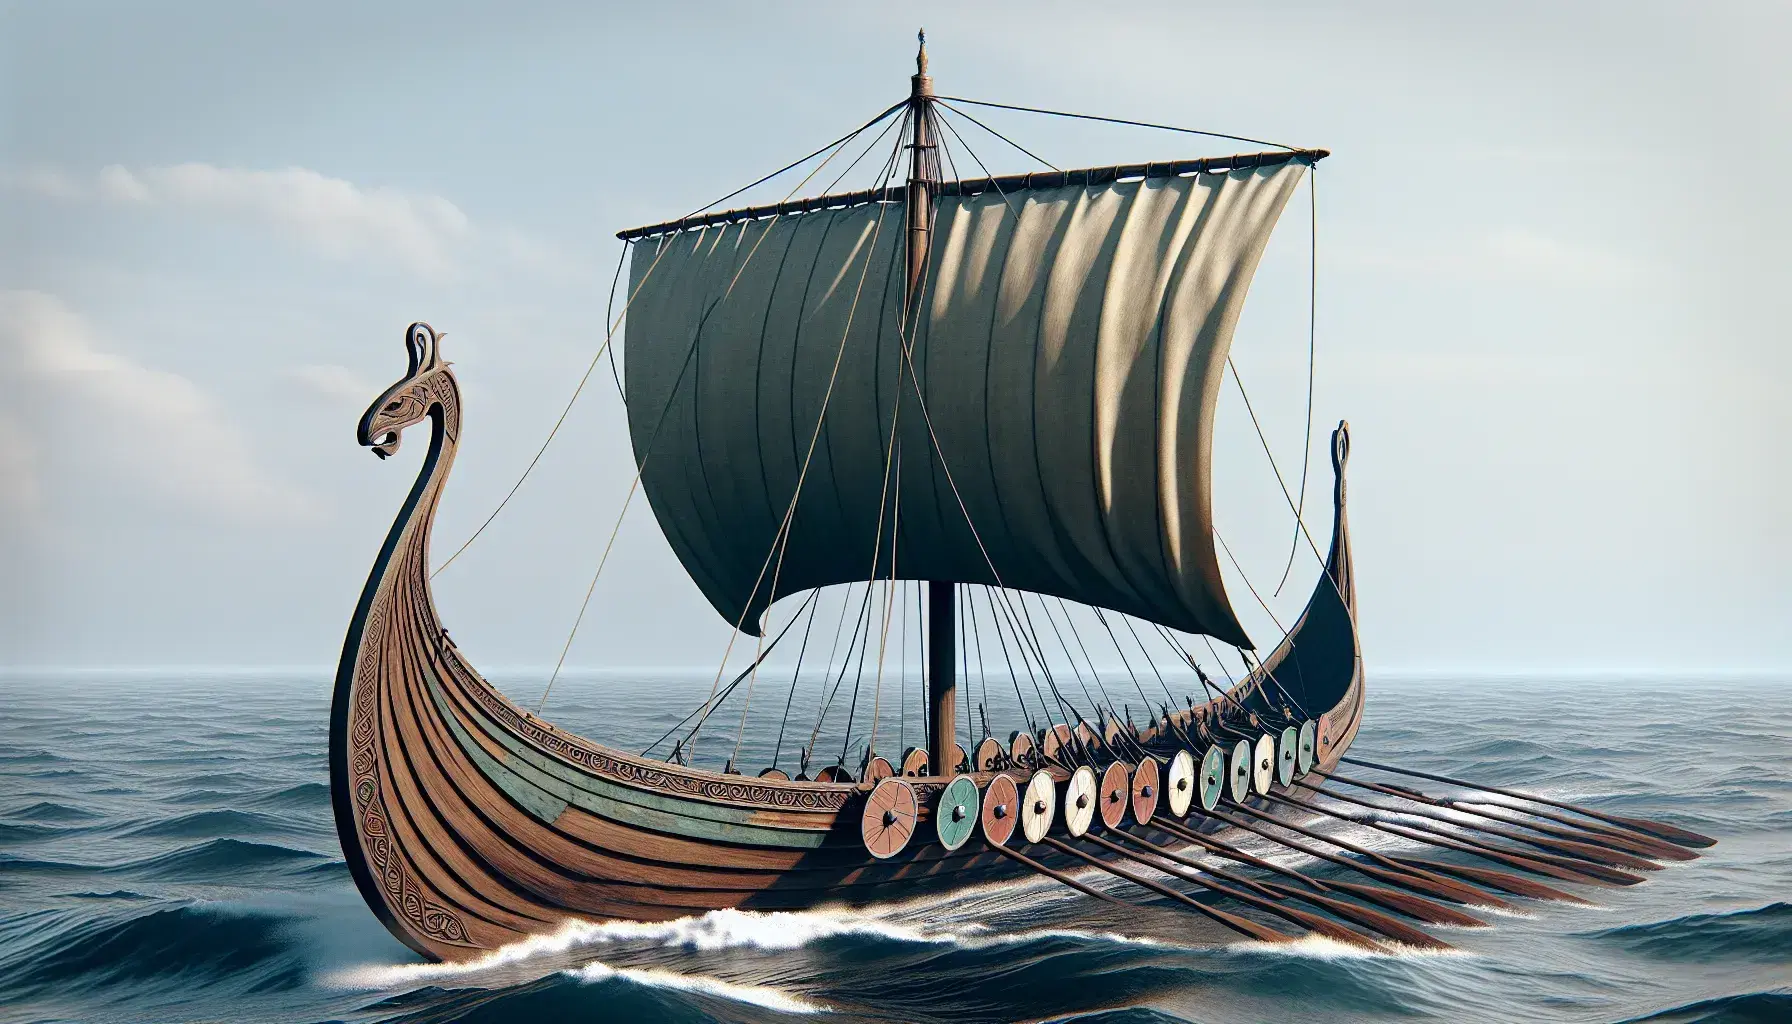 Traditional Viking longship at sea with a dragon head prow, lined with colorful shields, a single white sail, and oars, against a blue sky and distant coastline.